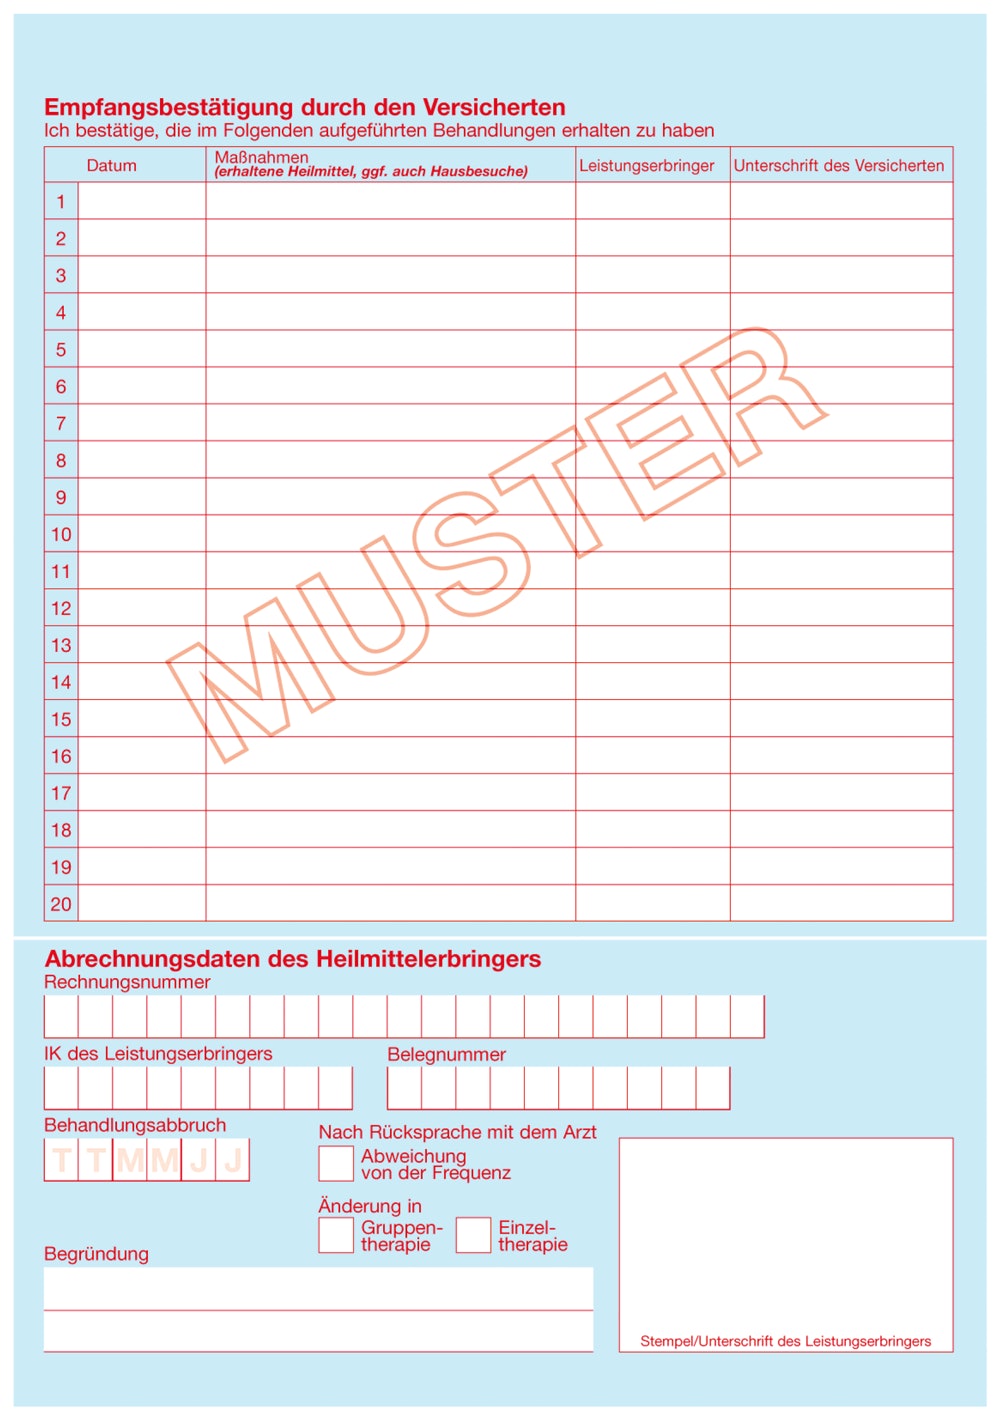 Muster_13-2-2021.png 